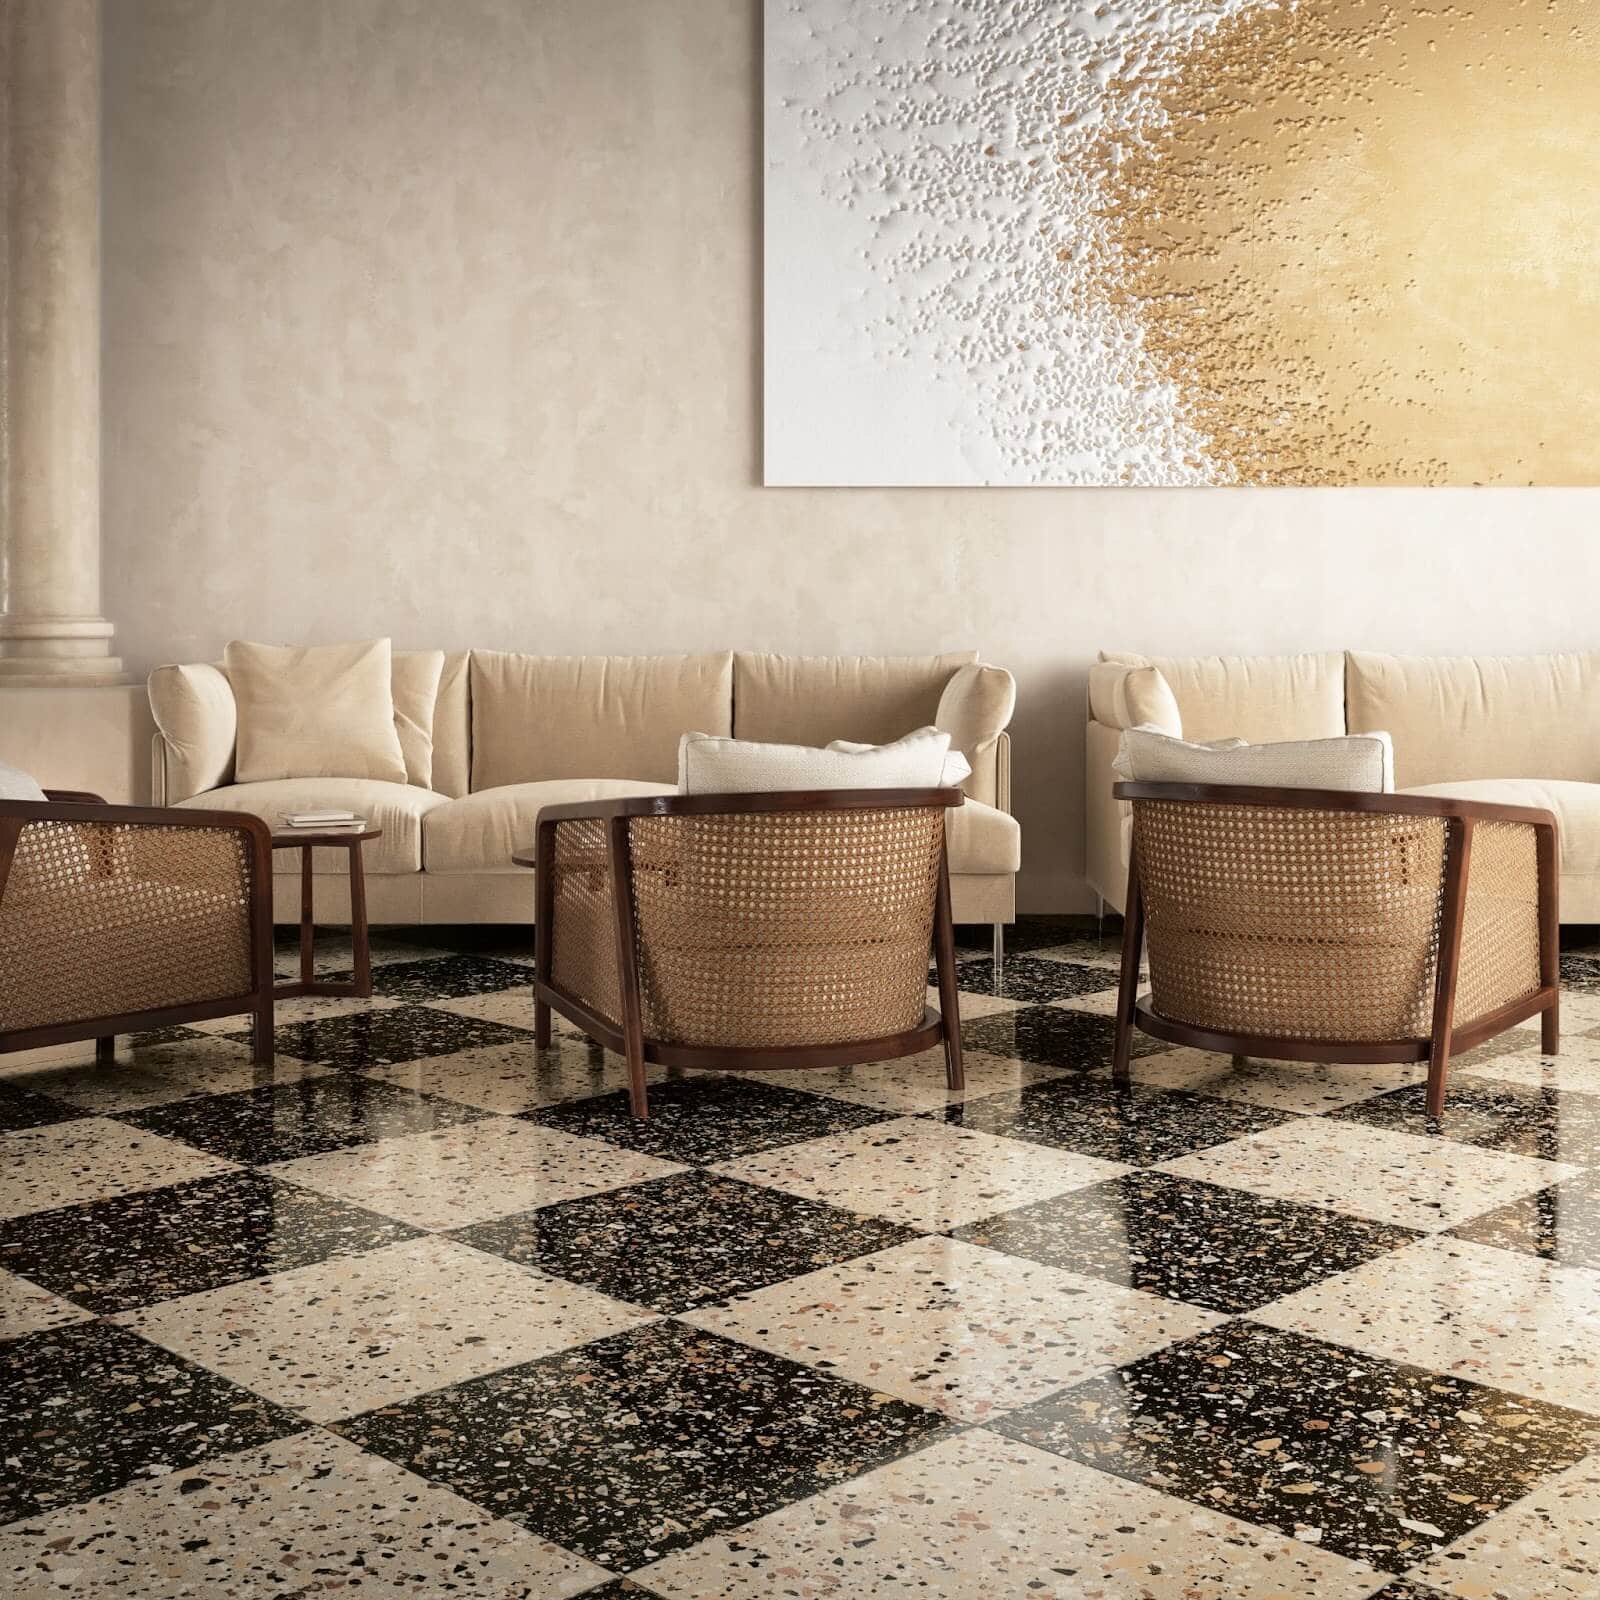 Waiting space in hotel with black and white ceramic tile flooring